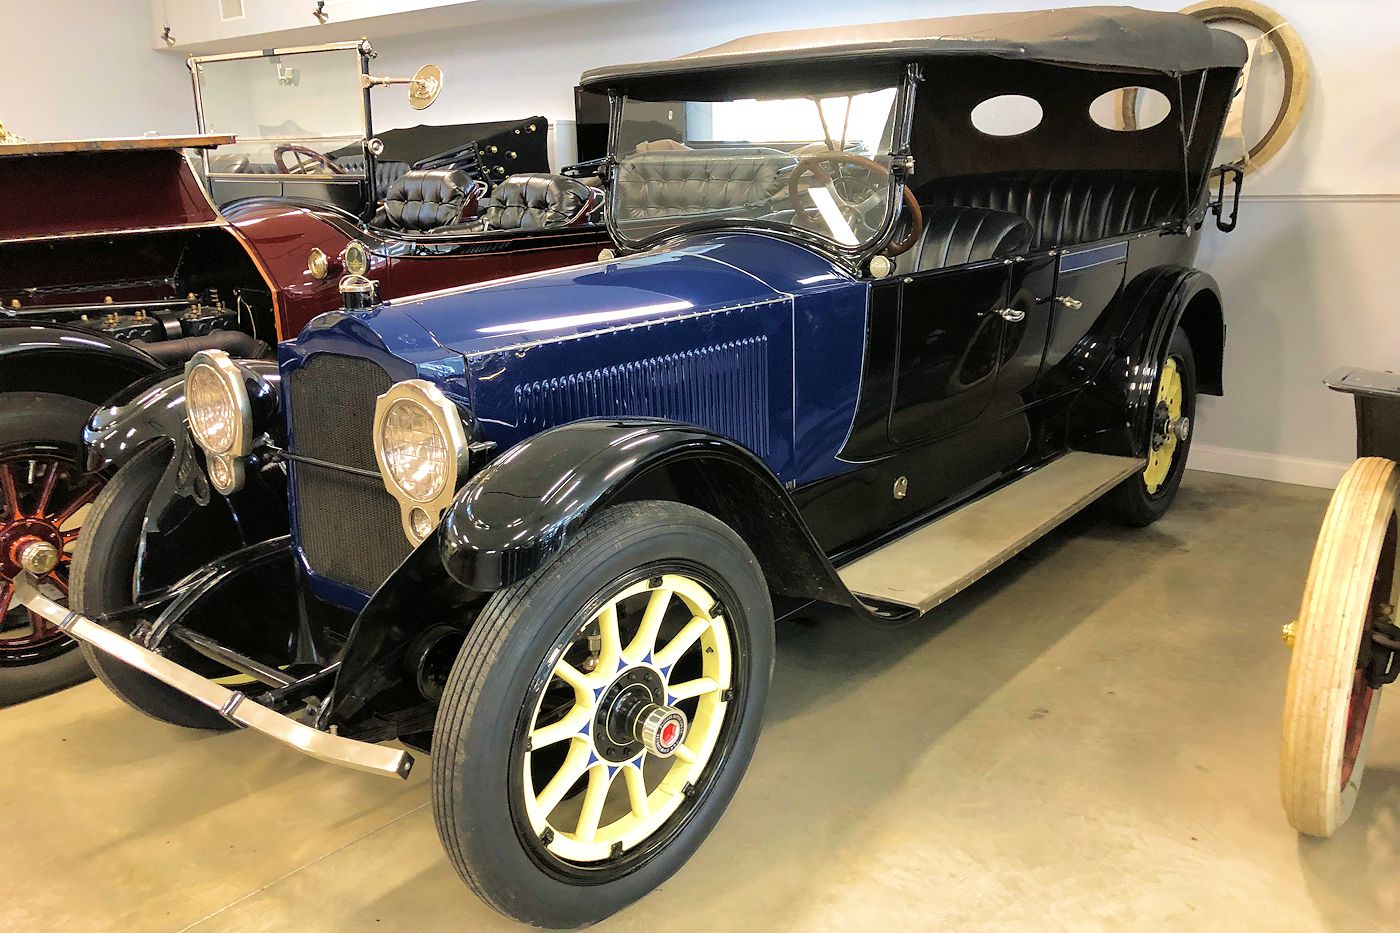 1921 Packard Twin 6, Model 135, 7 Passanger Touring - Laidlaw Classic Automotive Restoration & Sales